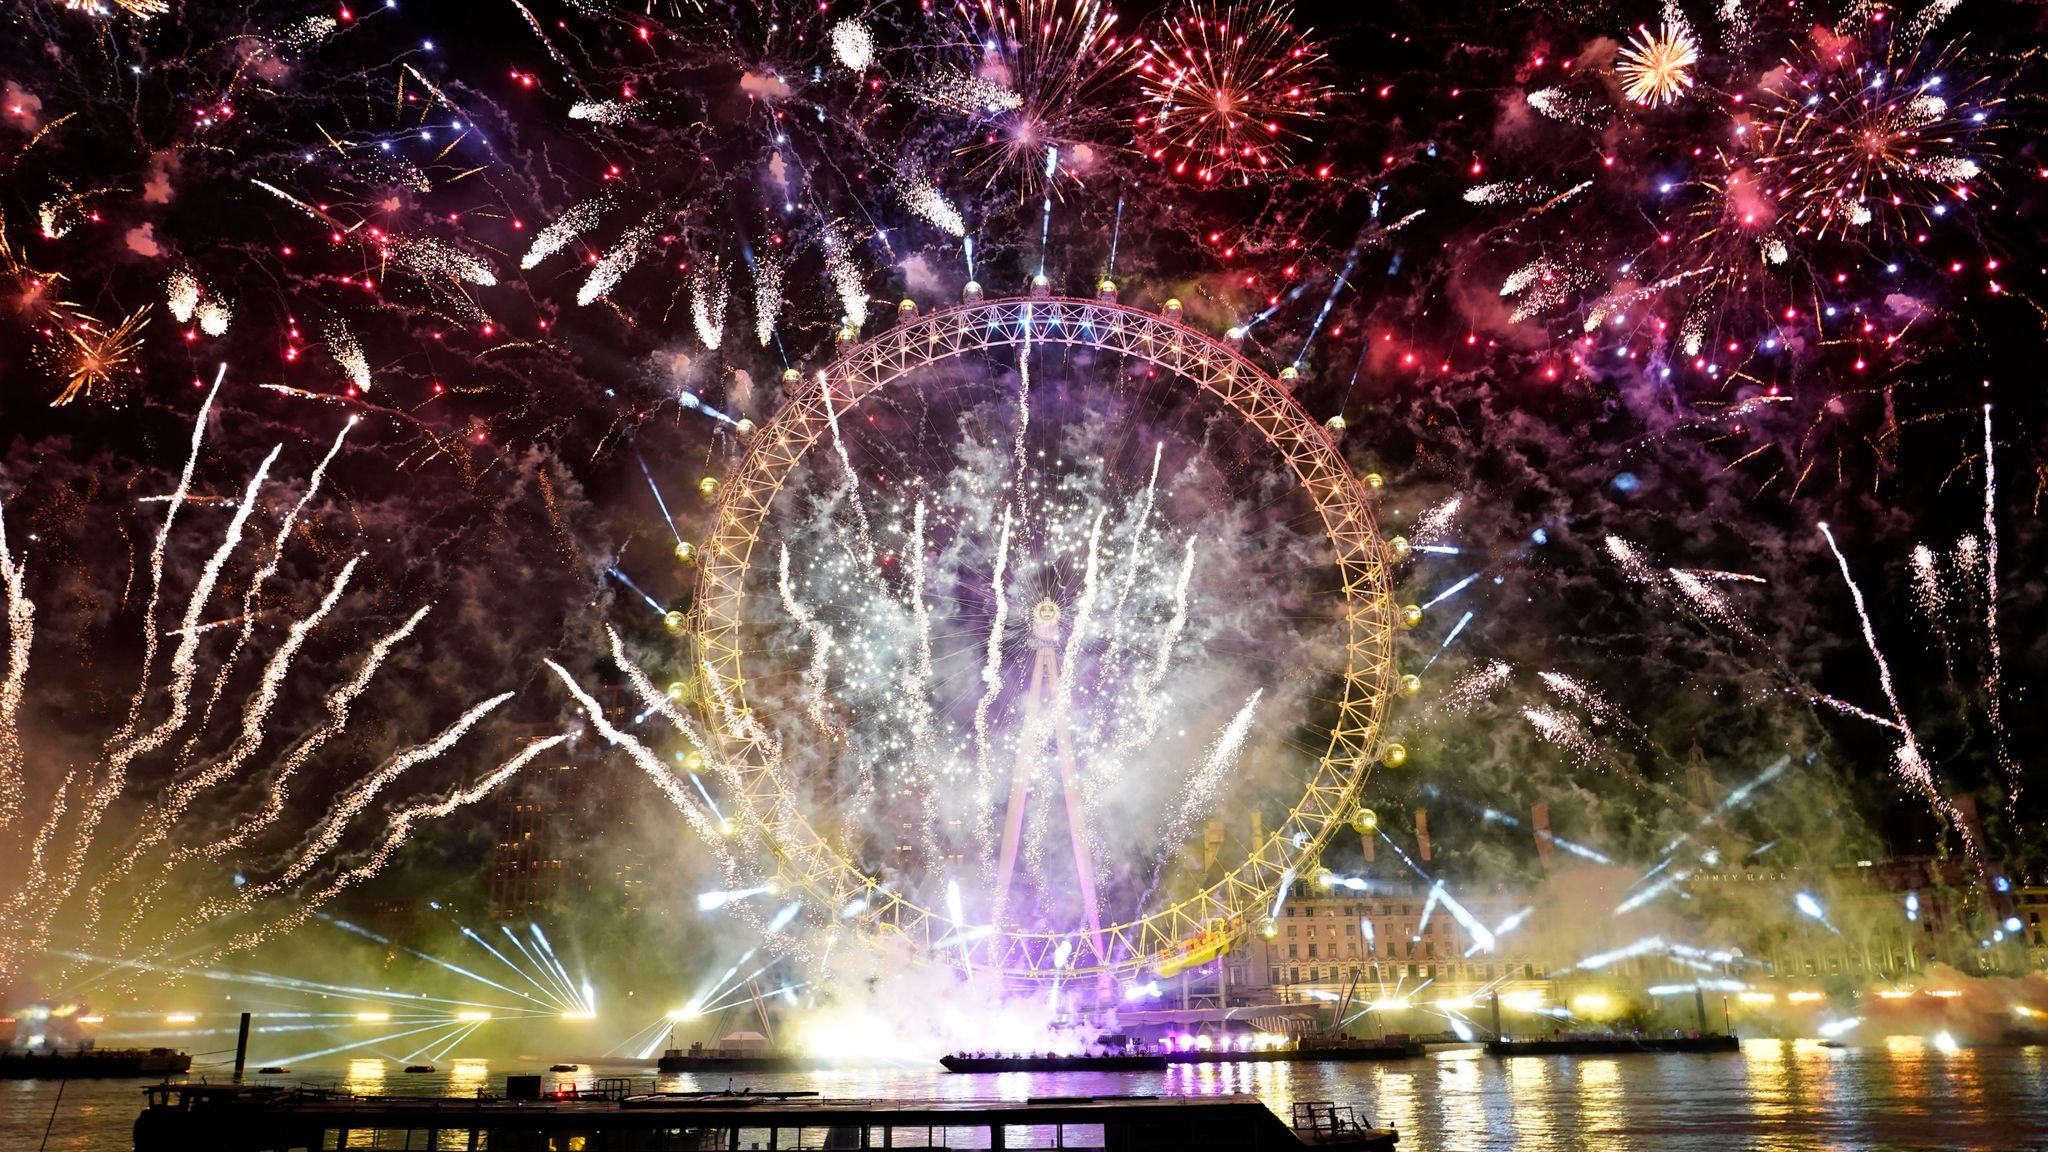 London's New Year fireworks display includes tribute to the Queen and